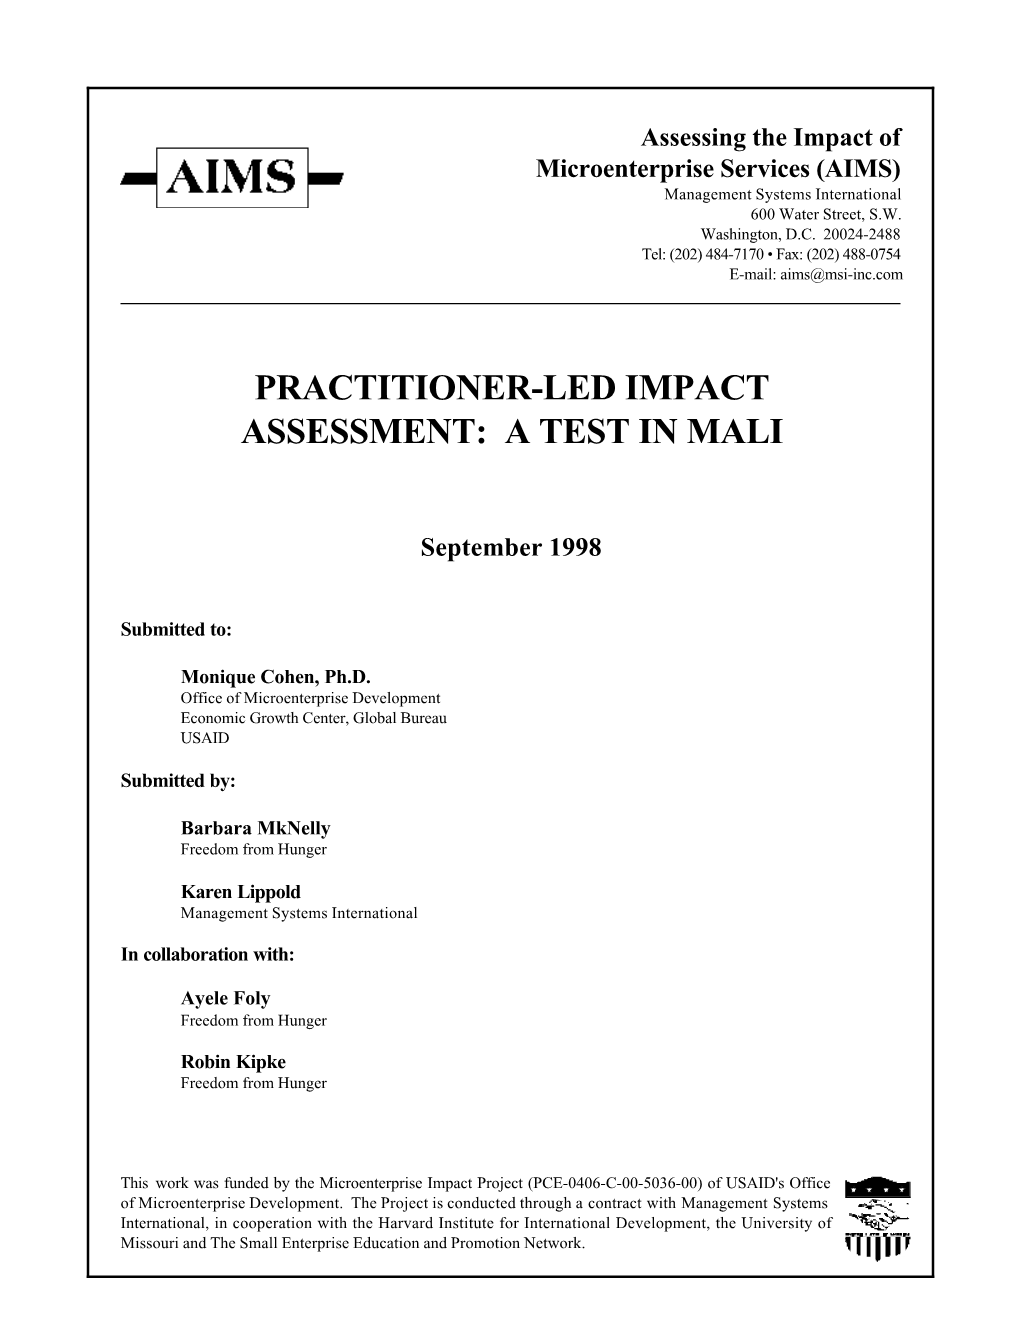 Practitioner-Led Impact Assessment: a Test in Mali